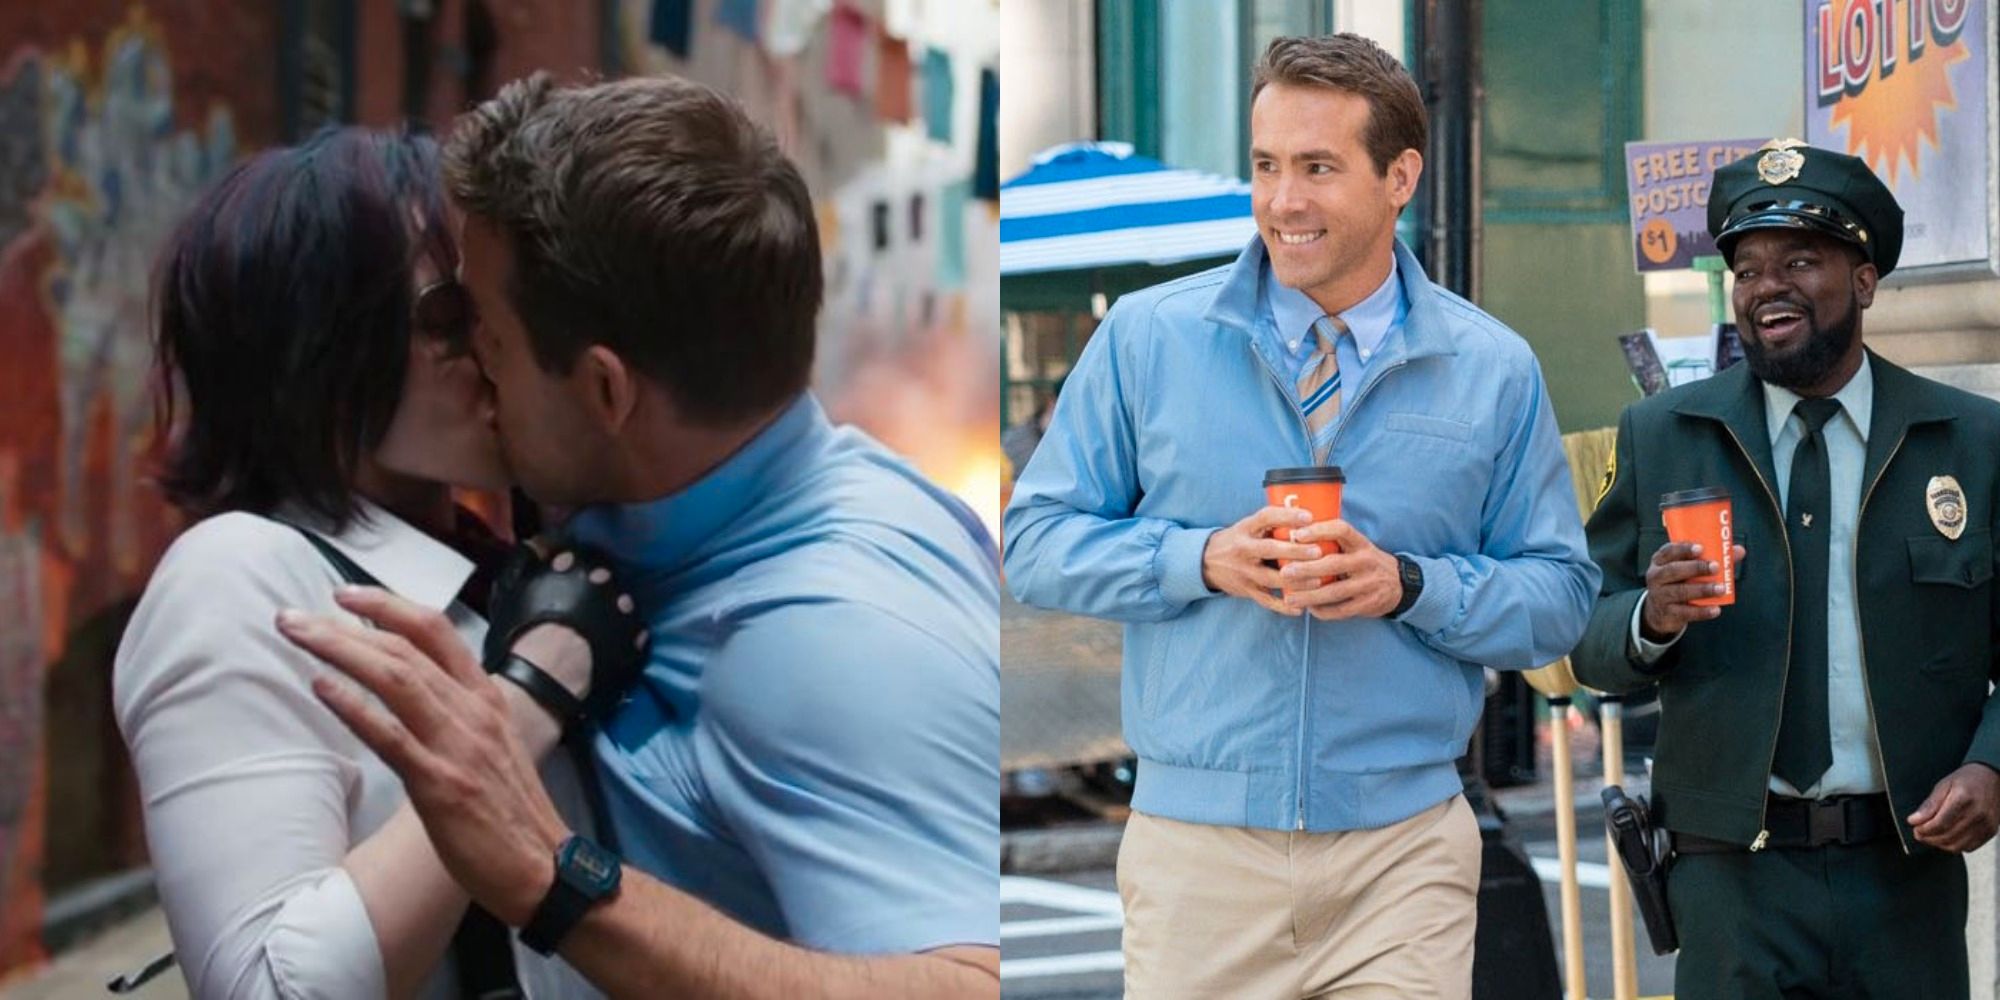 10 Rom Com Clichés Free Guy Absolutely Nails